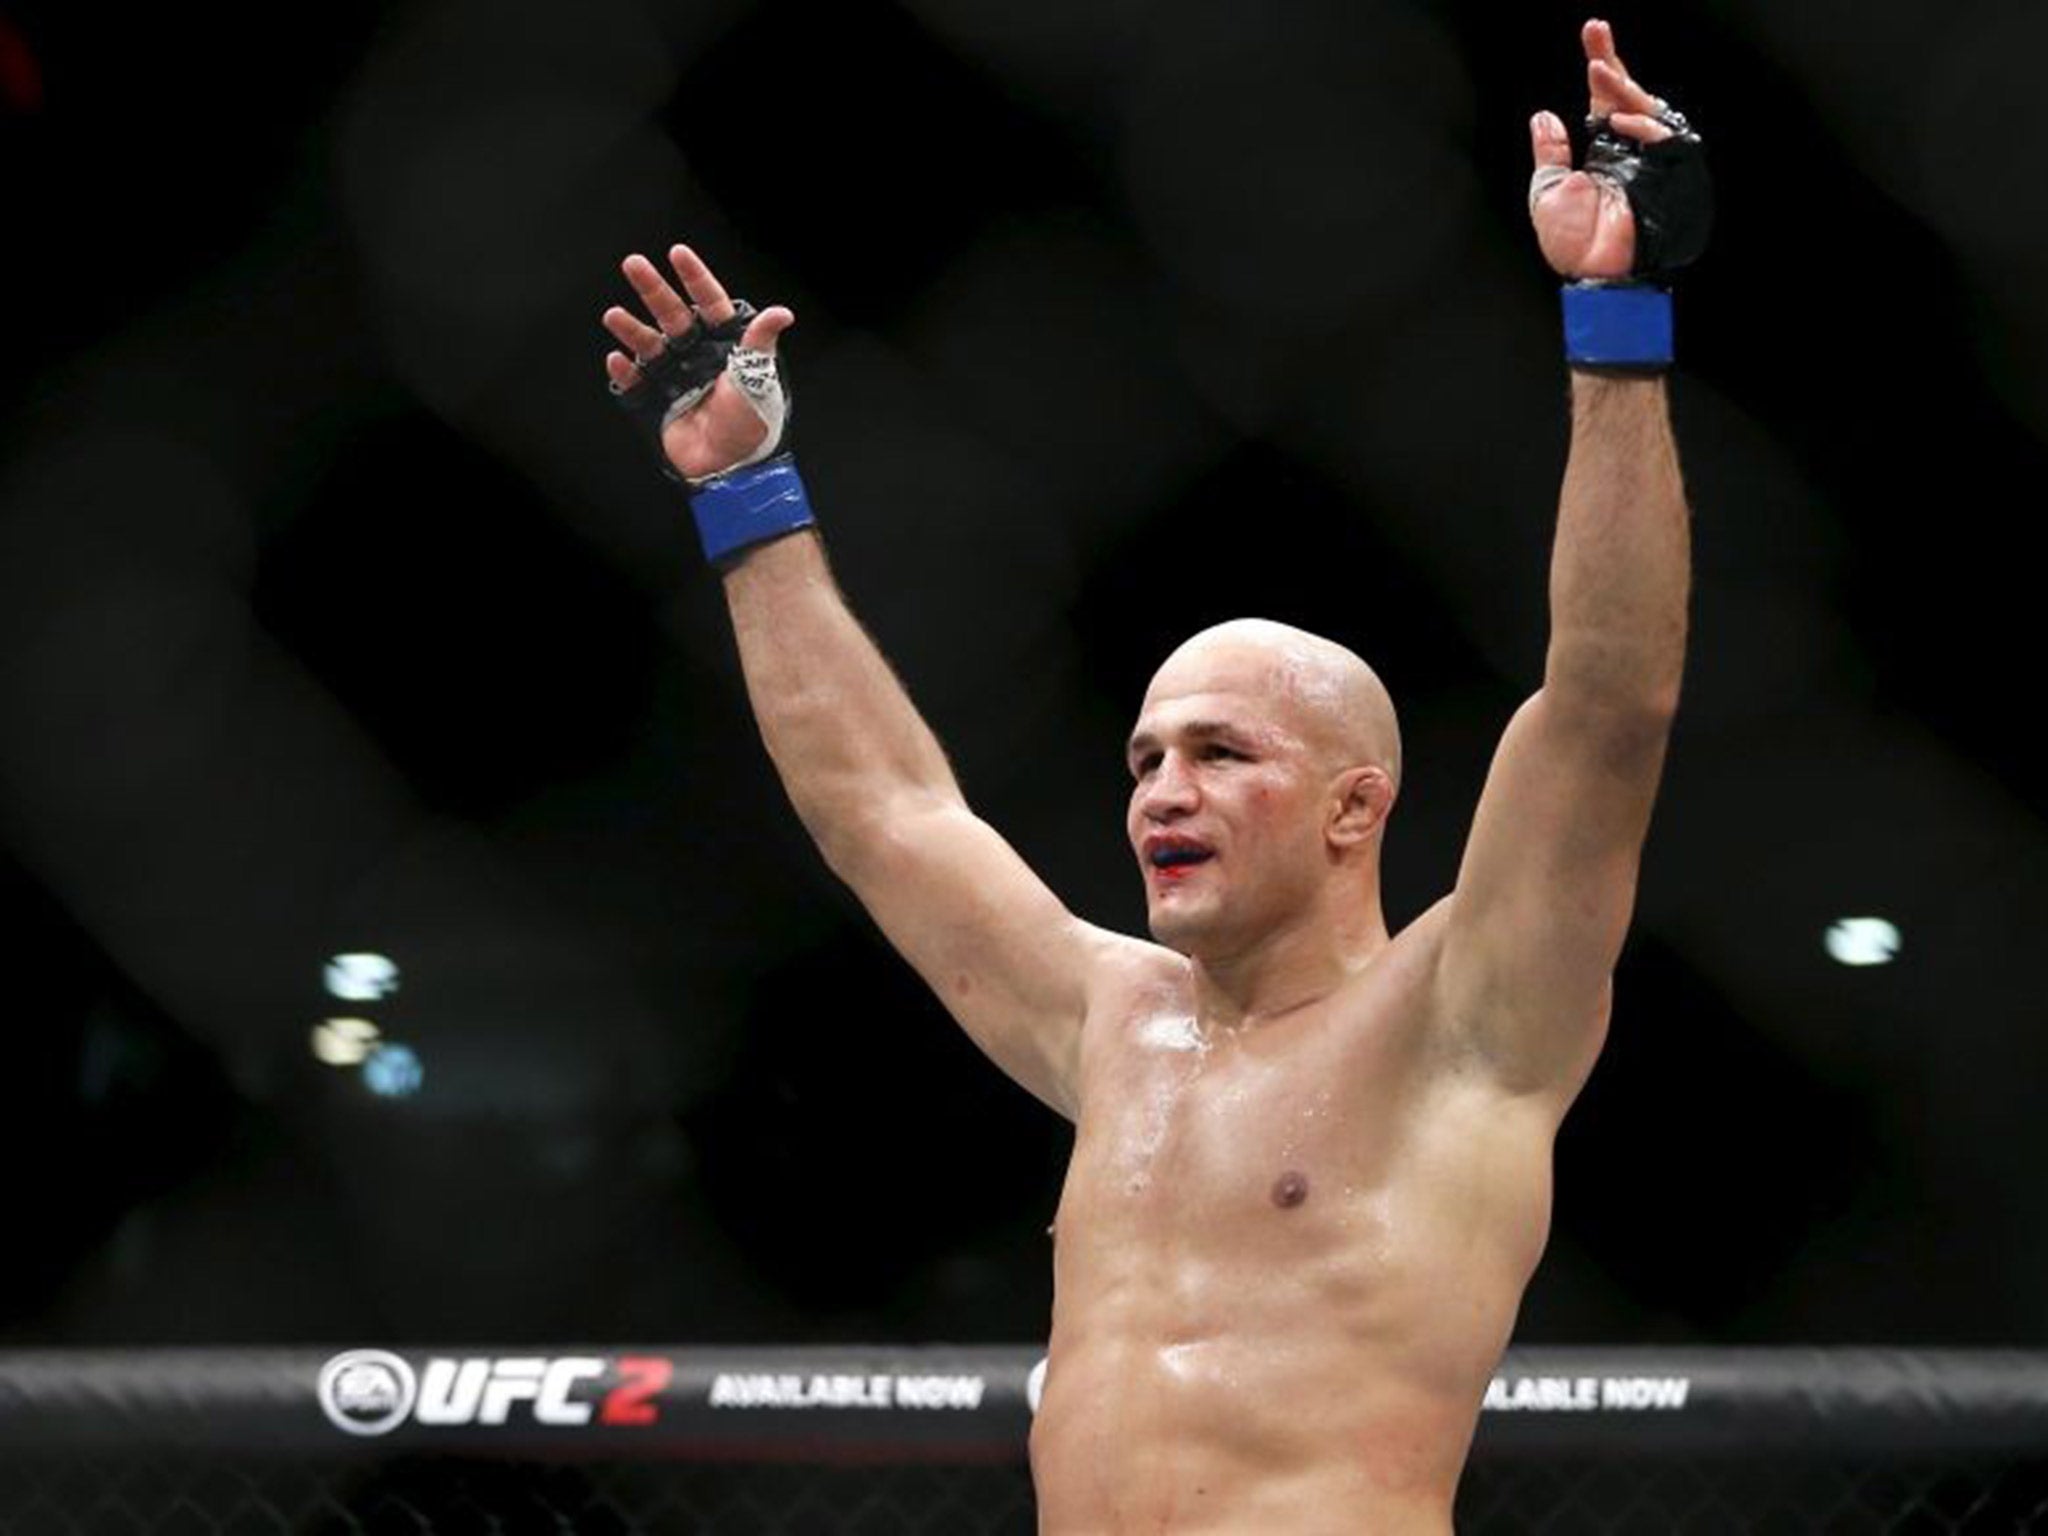 Junior Dos Santos celebrates his victory over Ben Rothwell at UFC Fight Night 86